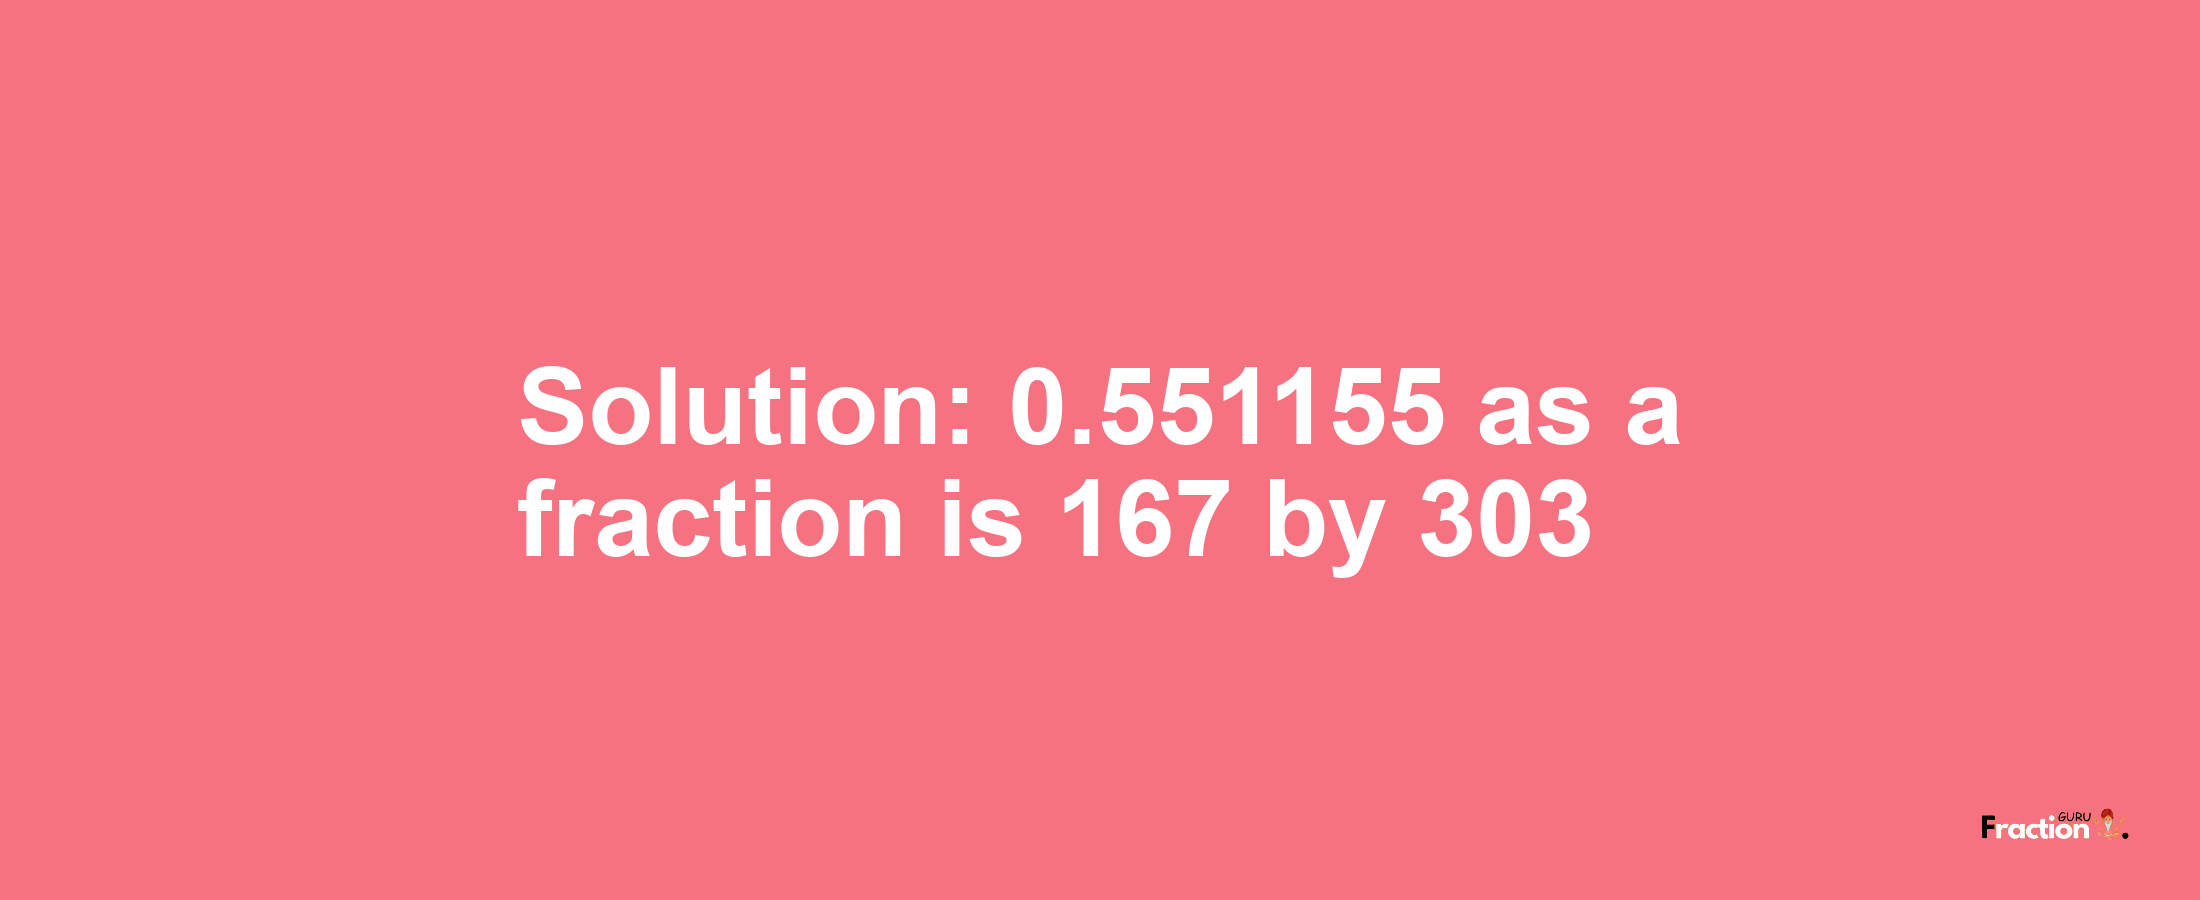 Solution:0.551155 as a fraction is 167/303